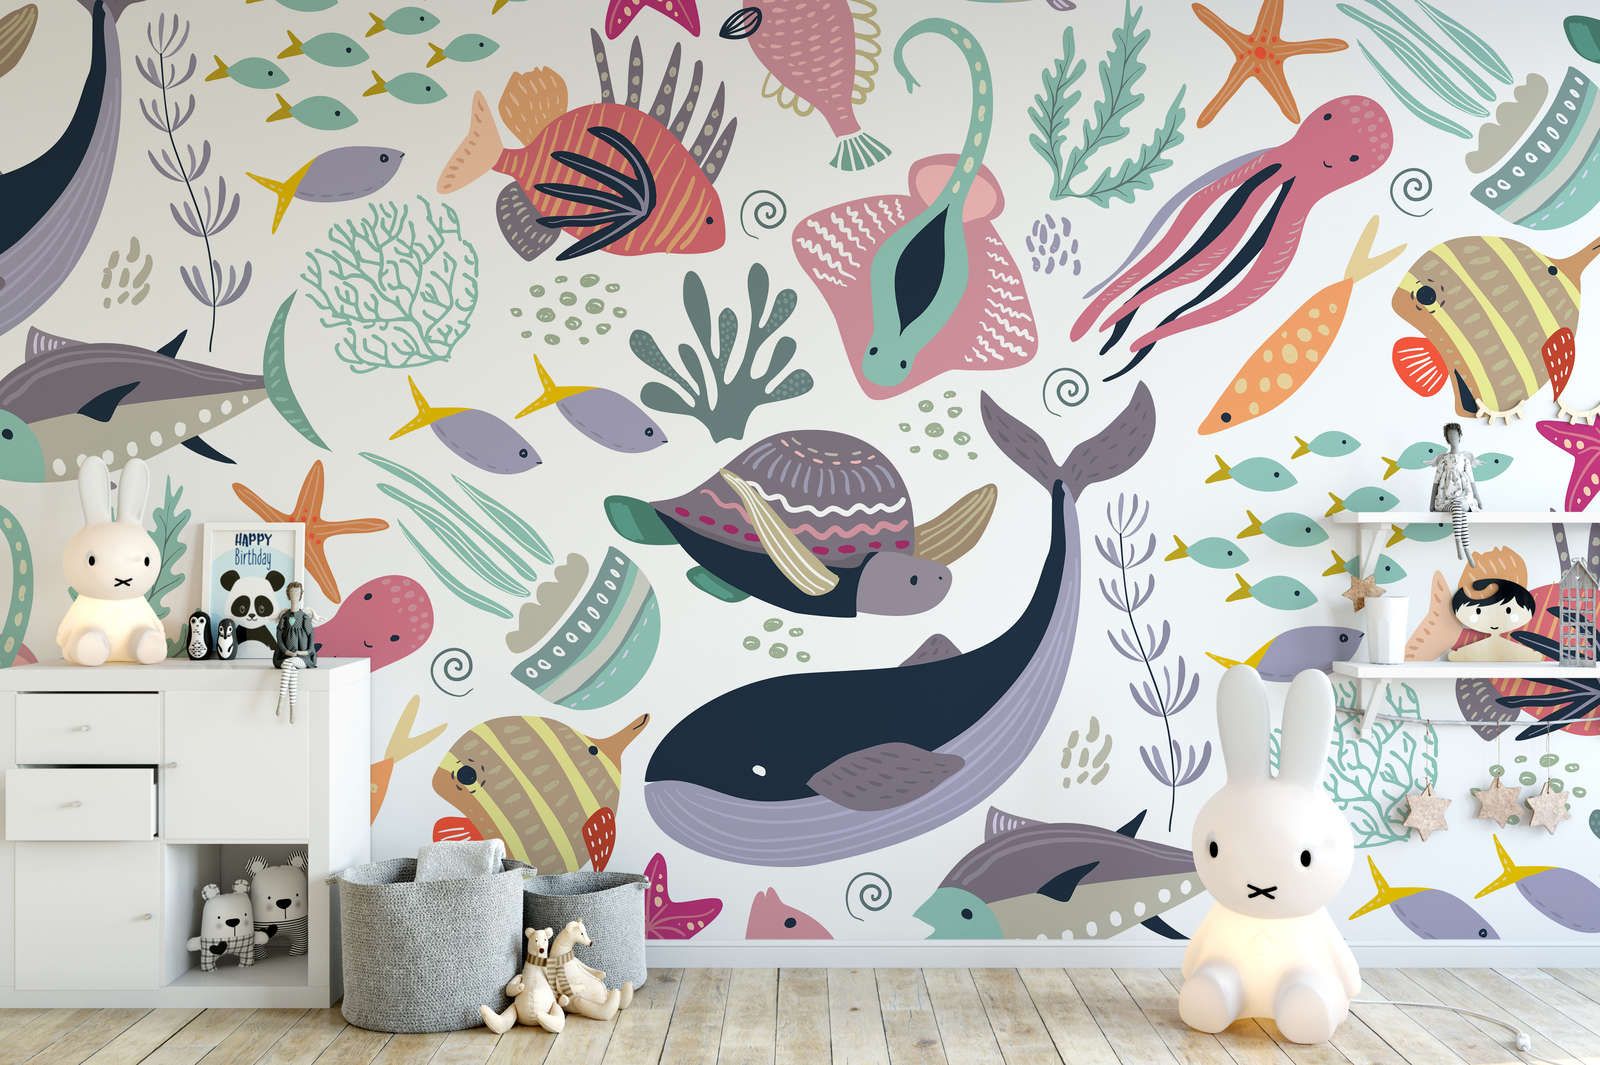             Nursery mural with underwater animals - Smooth & slightly glossy non-woven
        